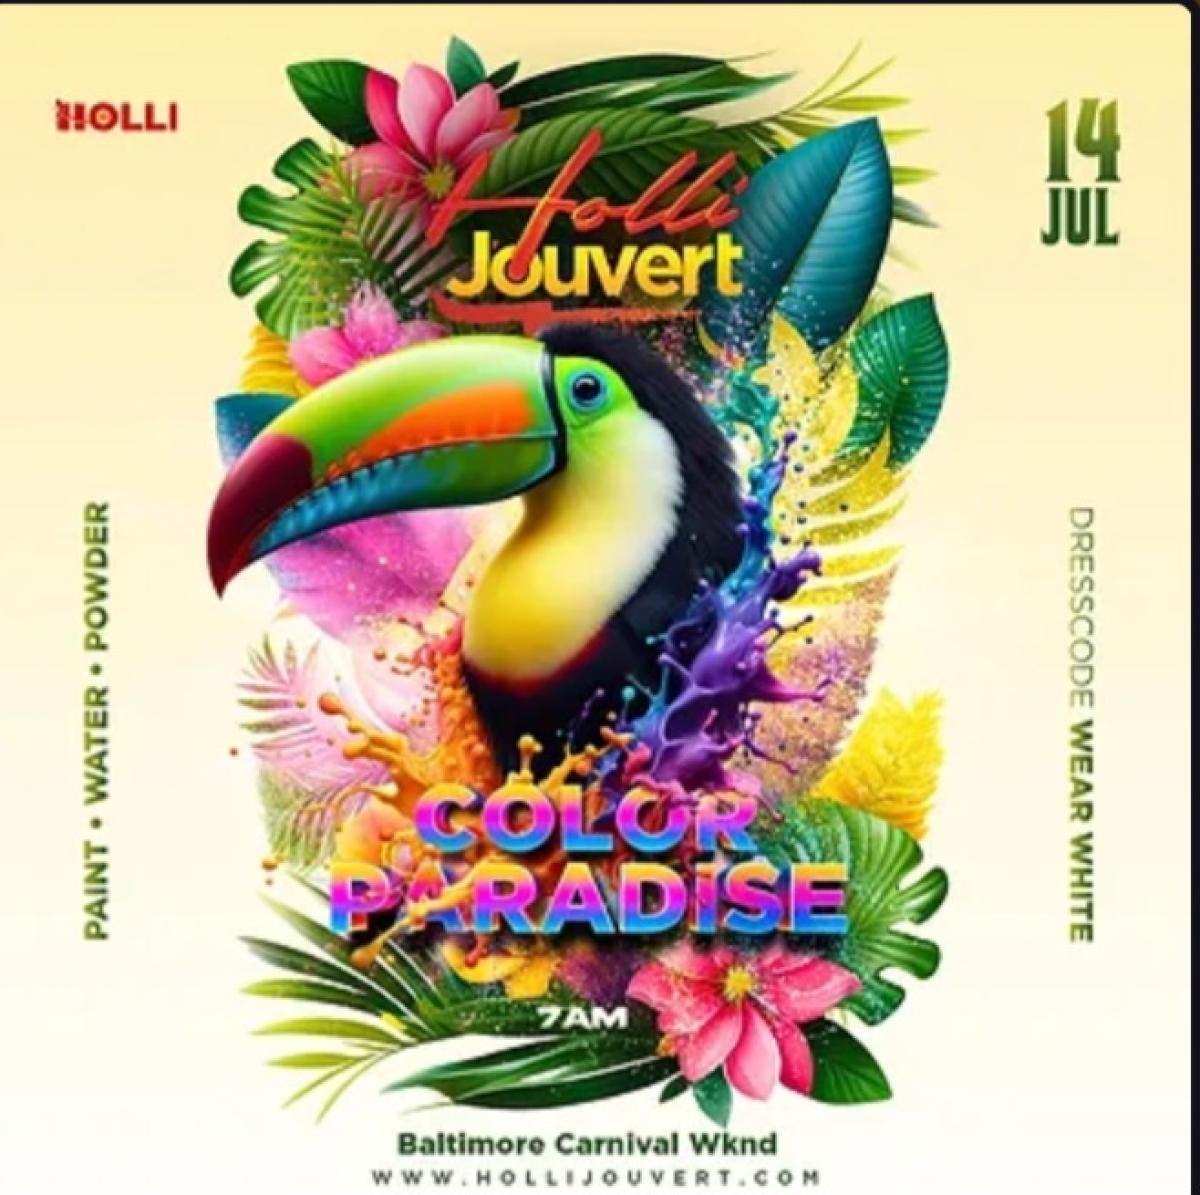 Holli J'ouvert - Color Paradise flyer or graphic.